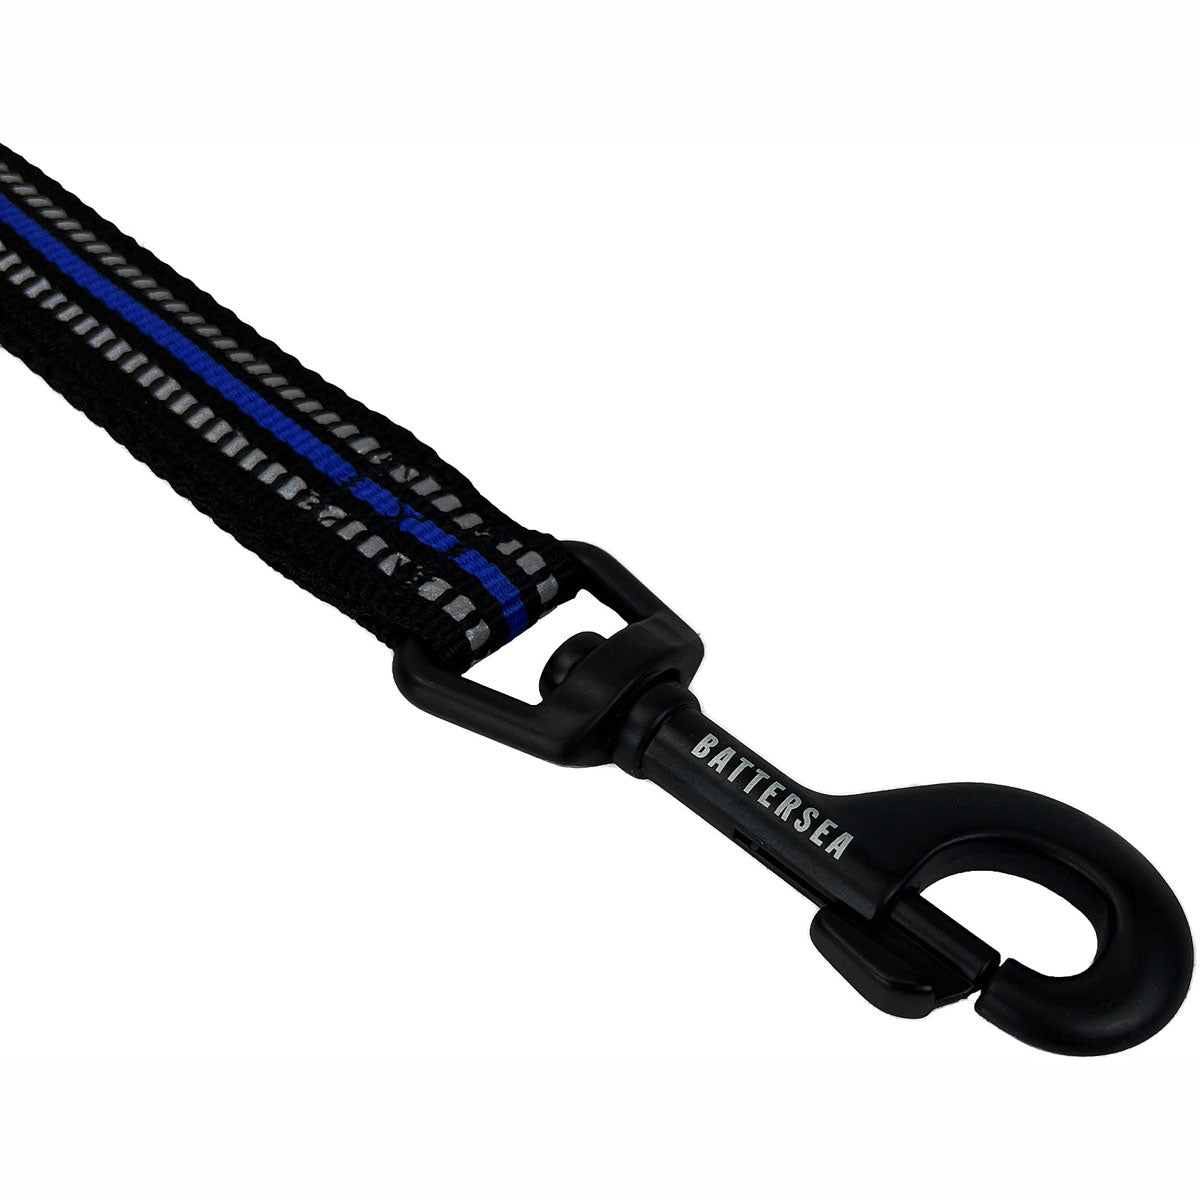 The 200cms Battersea Reflective Dog Lead: Make late-night walks with your pet a safe & enjoyable experience Blue Carabiner